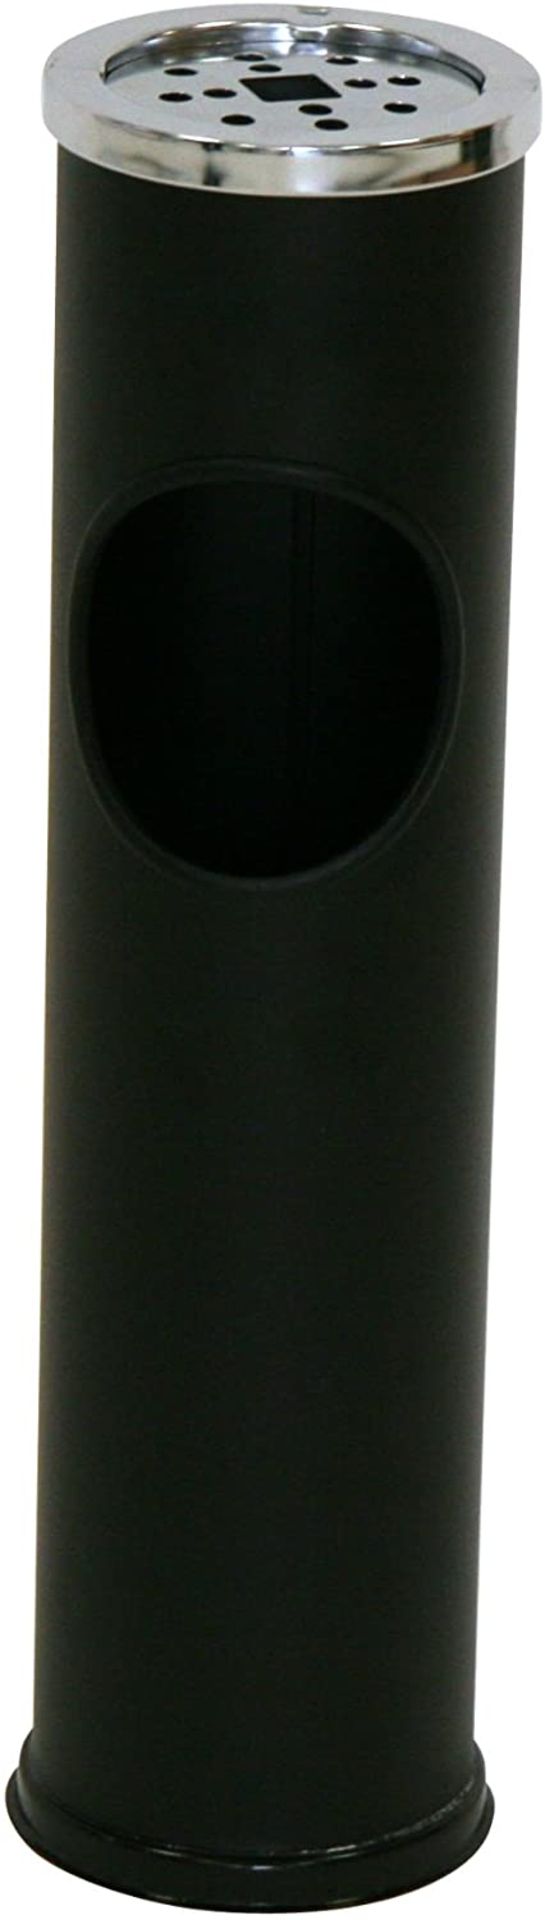 AXENTIA CIGARETTE BIN RRP £21.99Condition ReportAppraisal Available on Request- All Items are